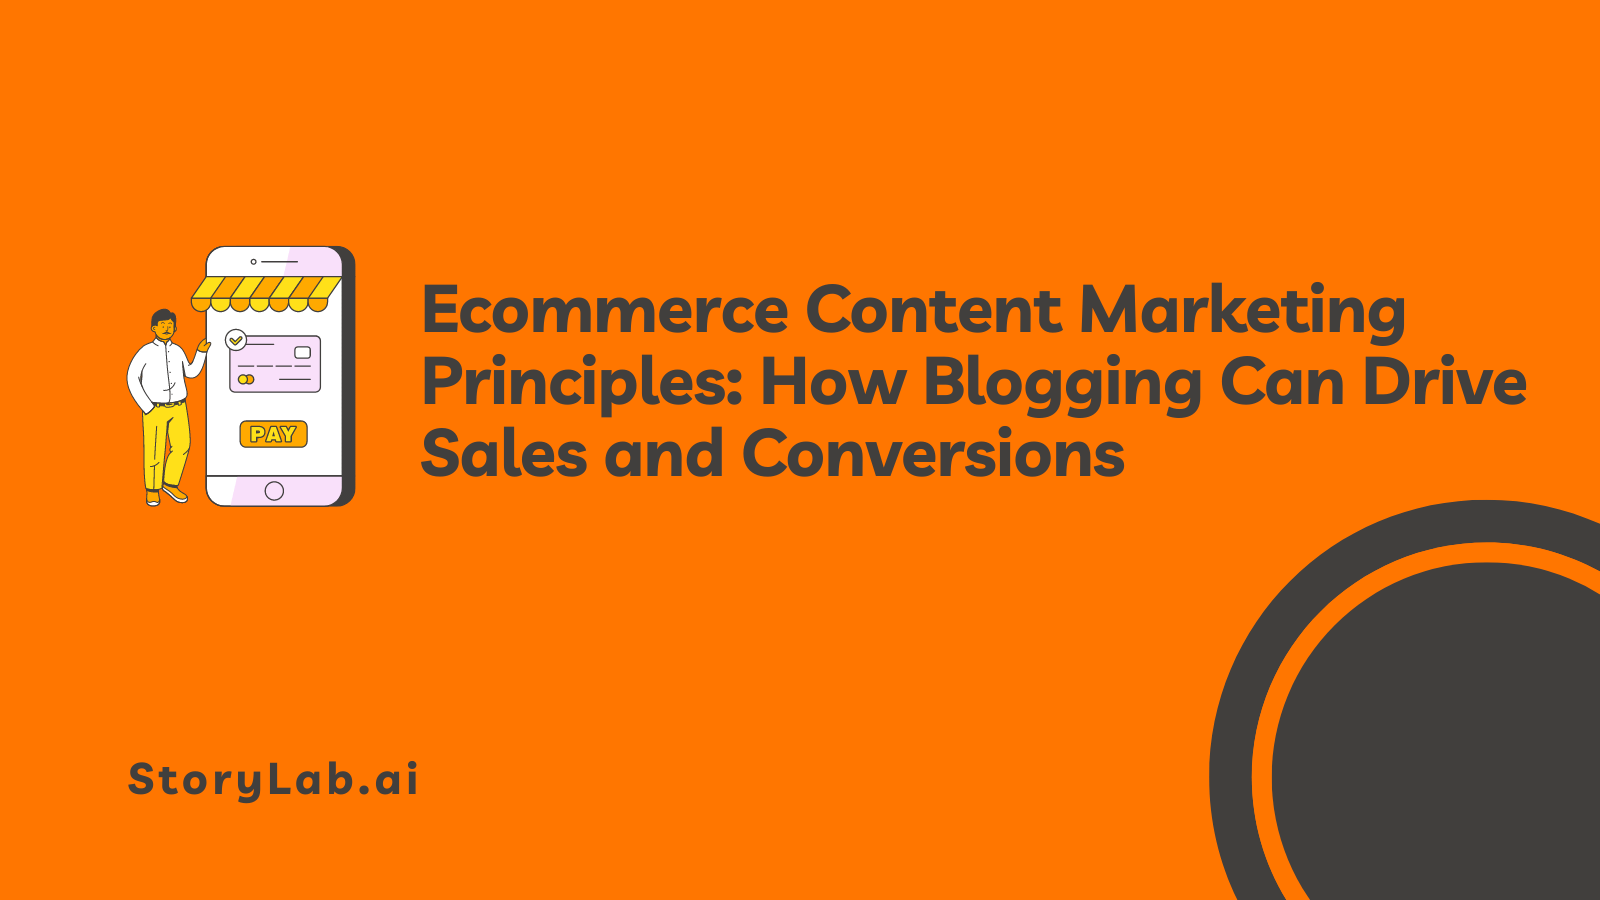 Ecommerce Content Marketing Principles How Blogging Can Drive Sales and Conversions